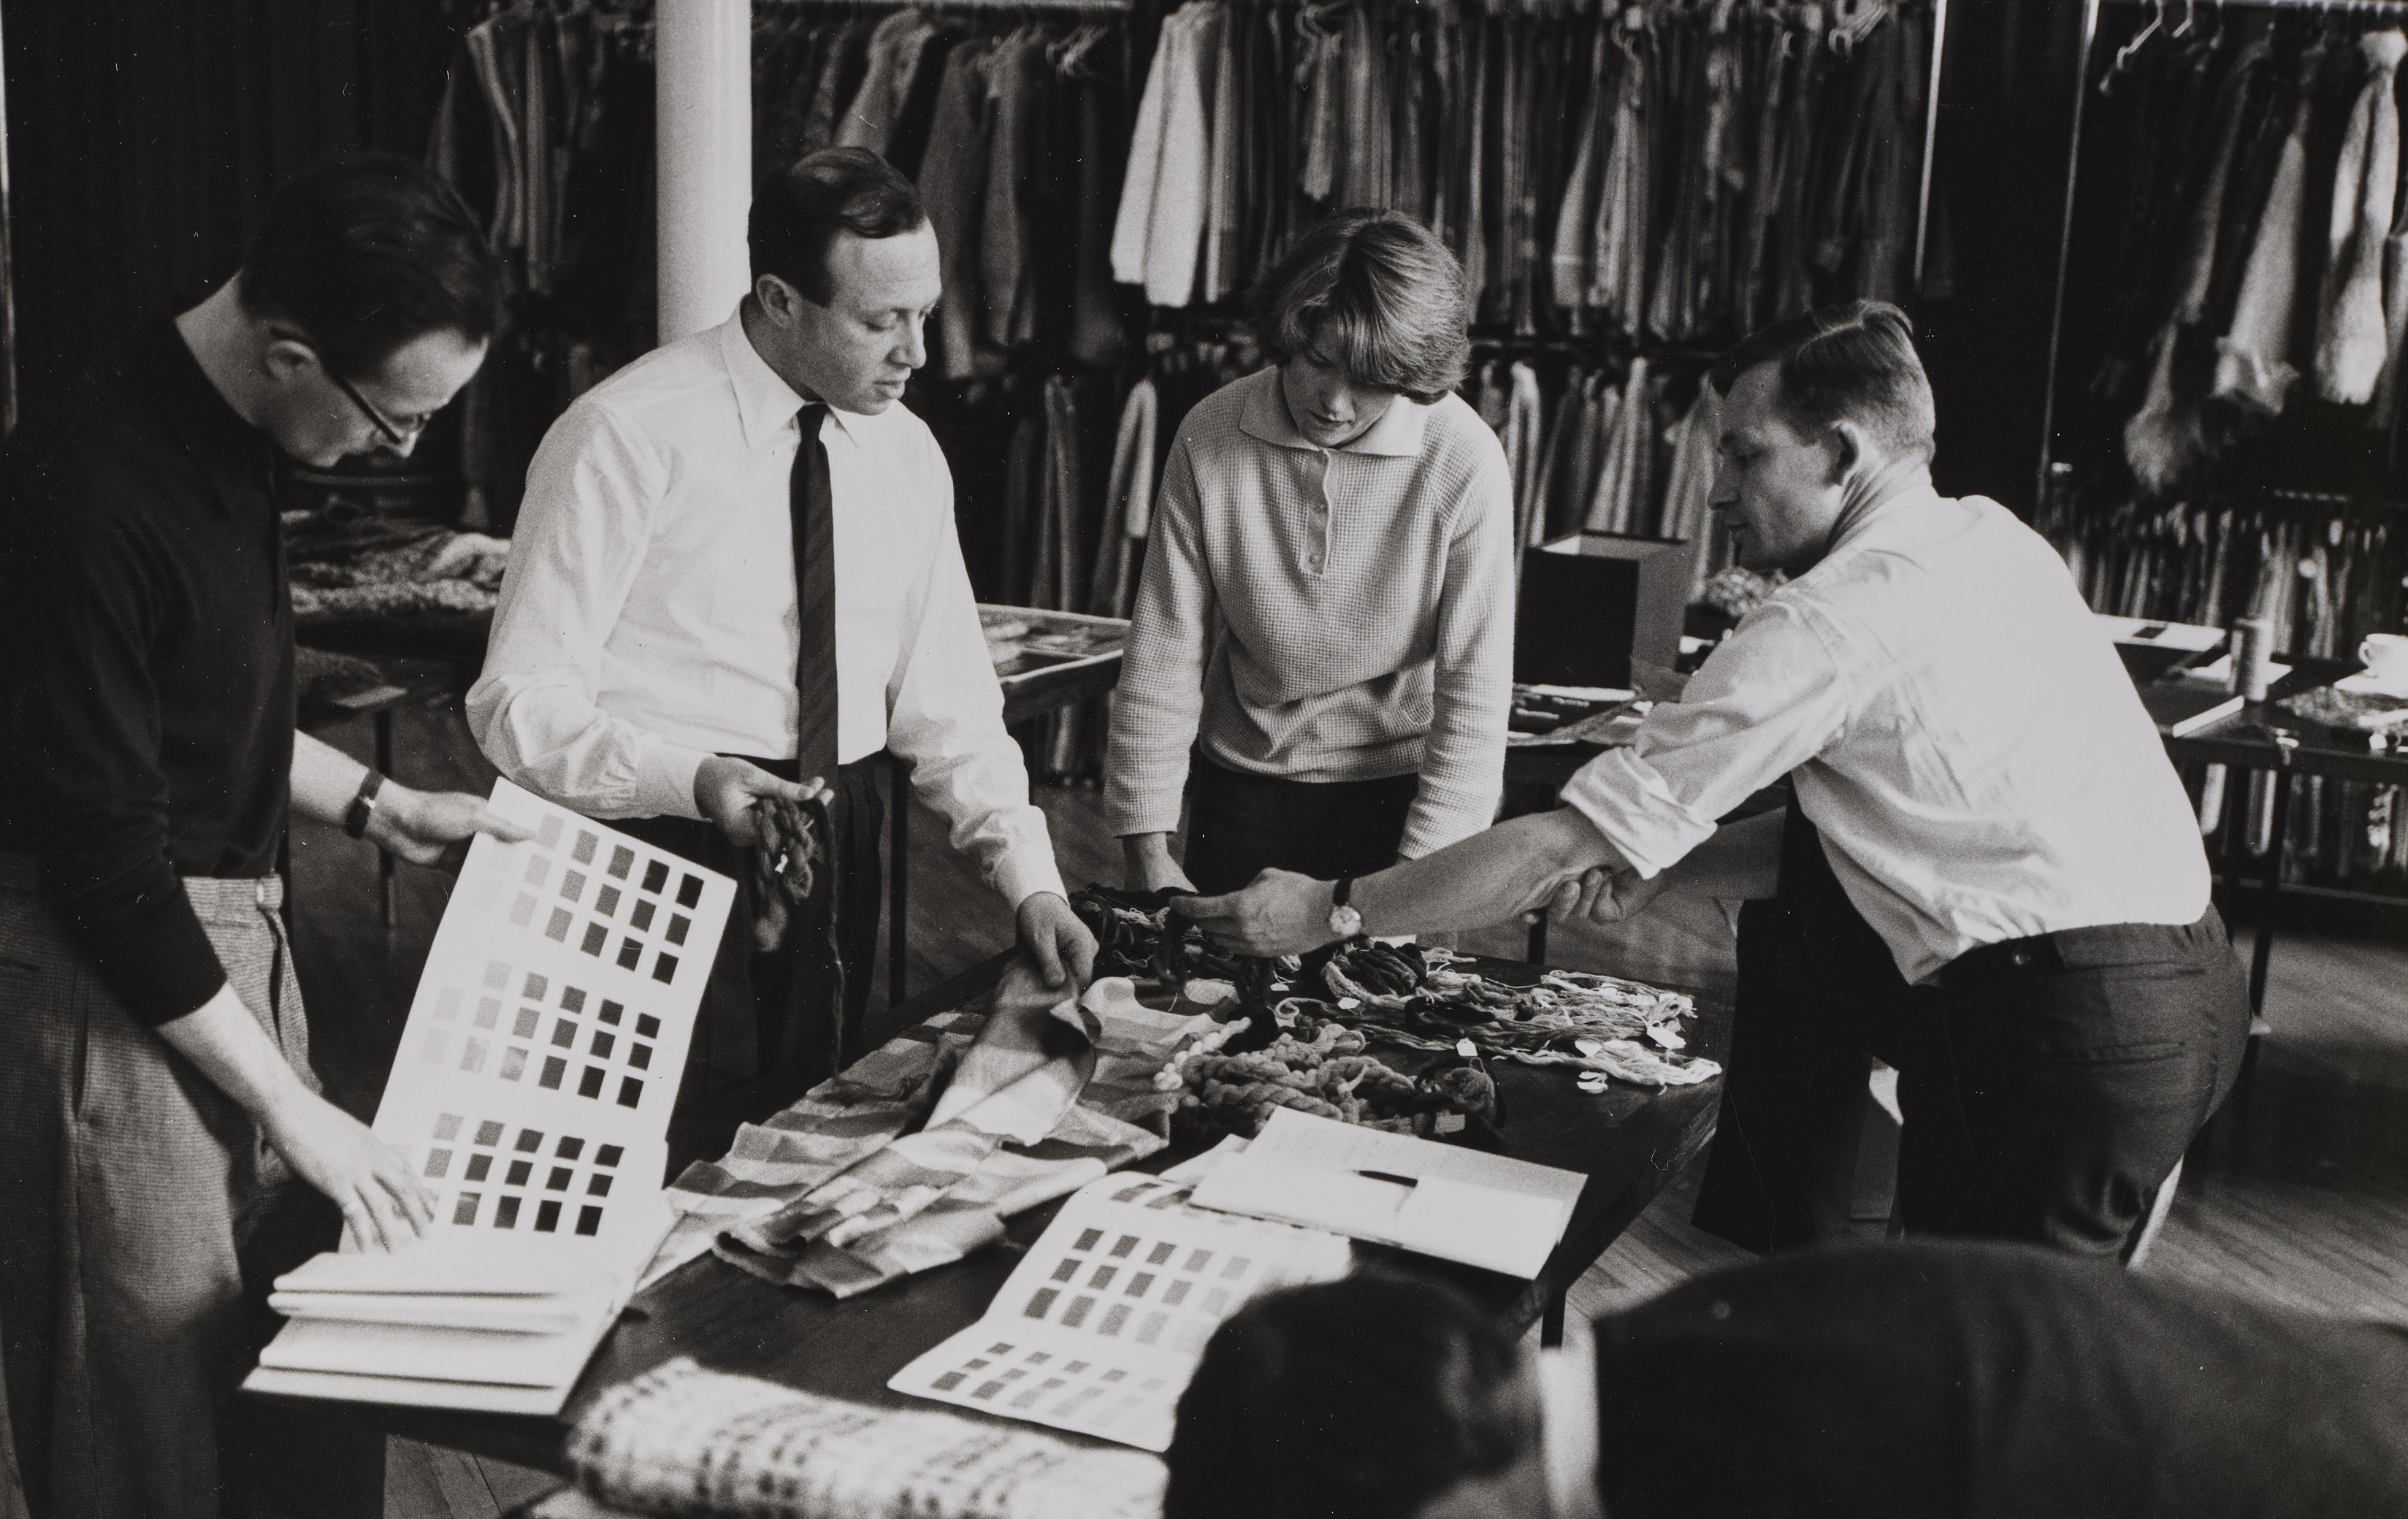 Bernat Klein and colleagues examine swatches of fabric in a black and white photo.